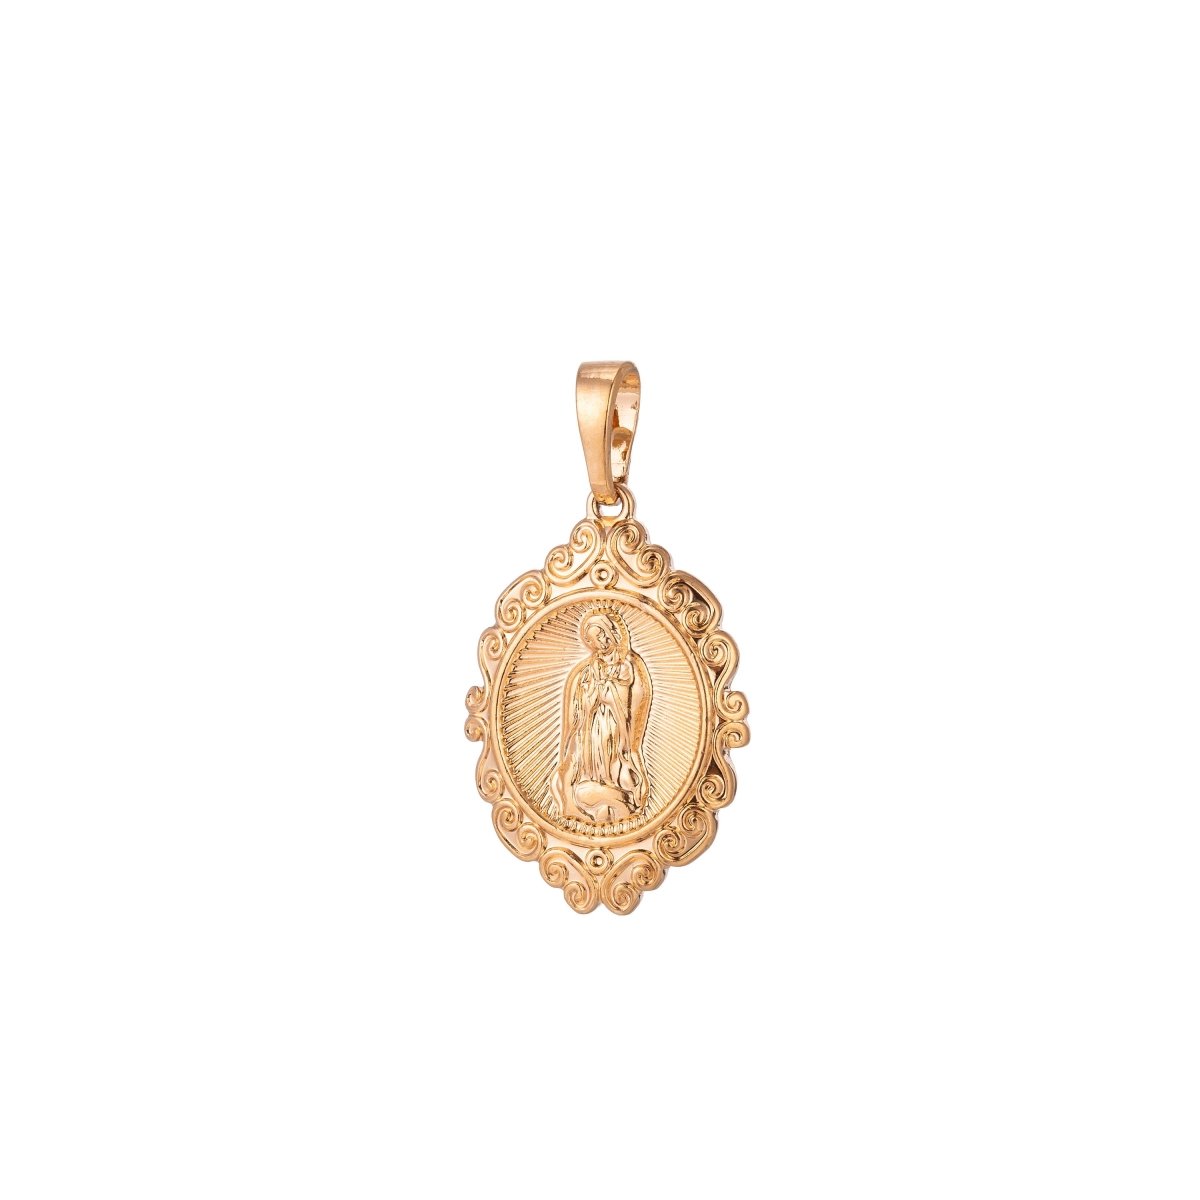 Virgin Mary Charm, 18K Gold Filled Pendant Dainty Virgen de Guadalupe Necklace Charm for Jewelry Making H-870 - DLUXCA